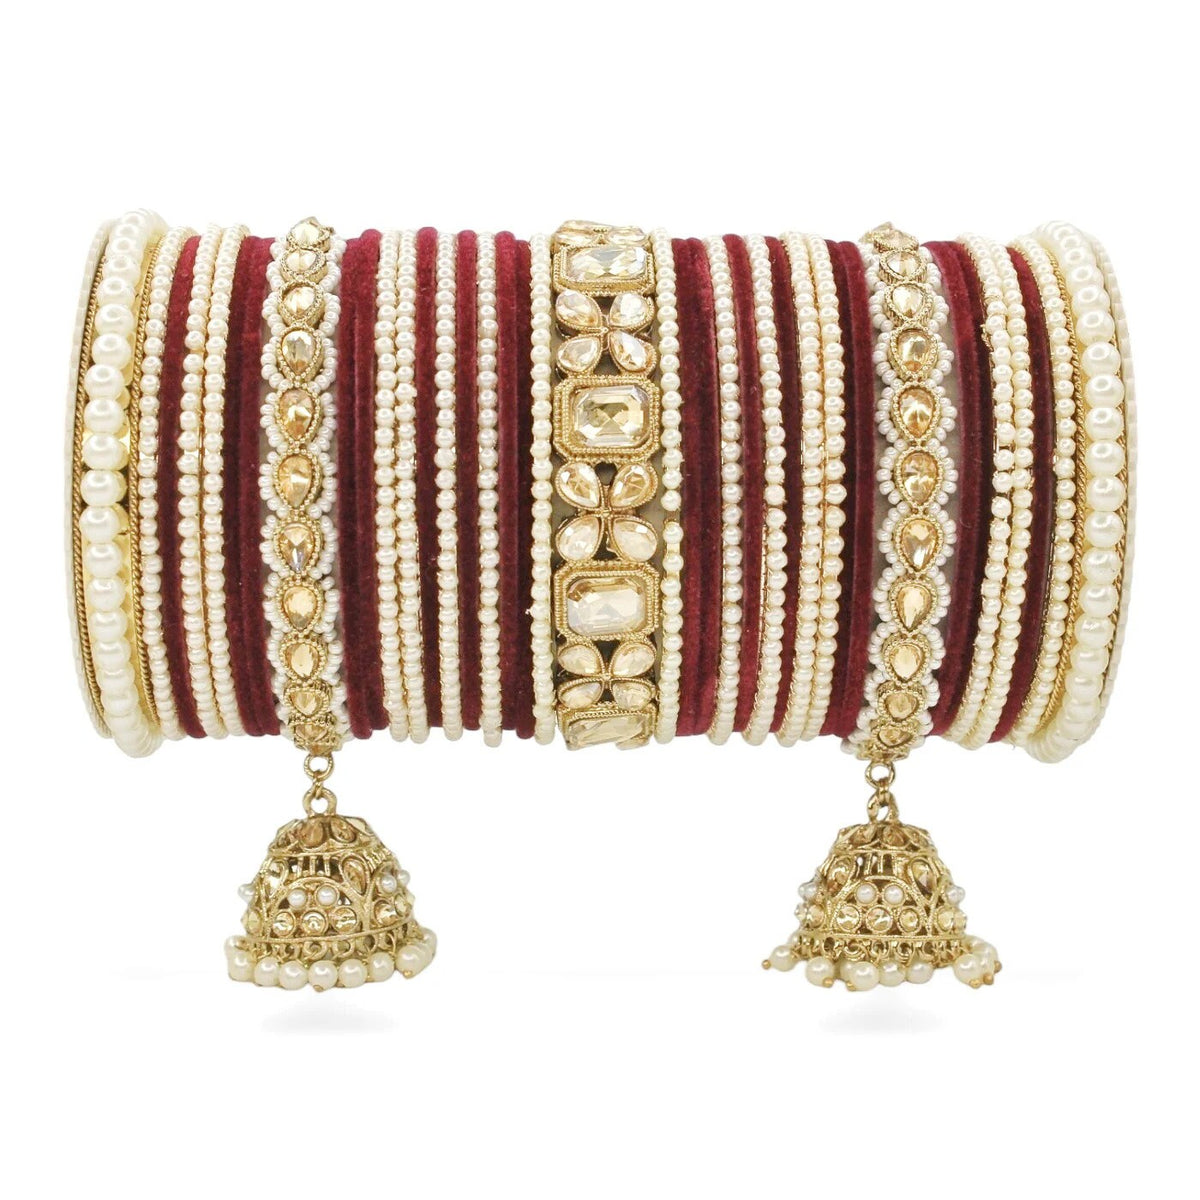 Indian Bangles in Different Colors Pearl Bangles Set with Jhumki Borders, Indian wedding Tassel Bangles Set Woman Jewelry Set